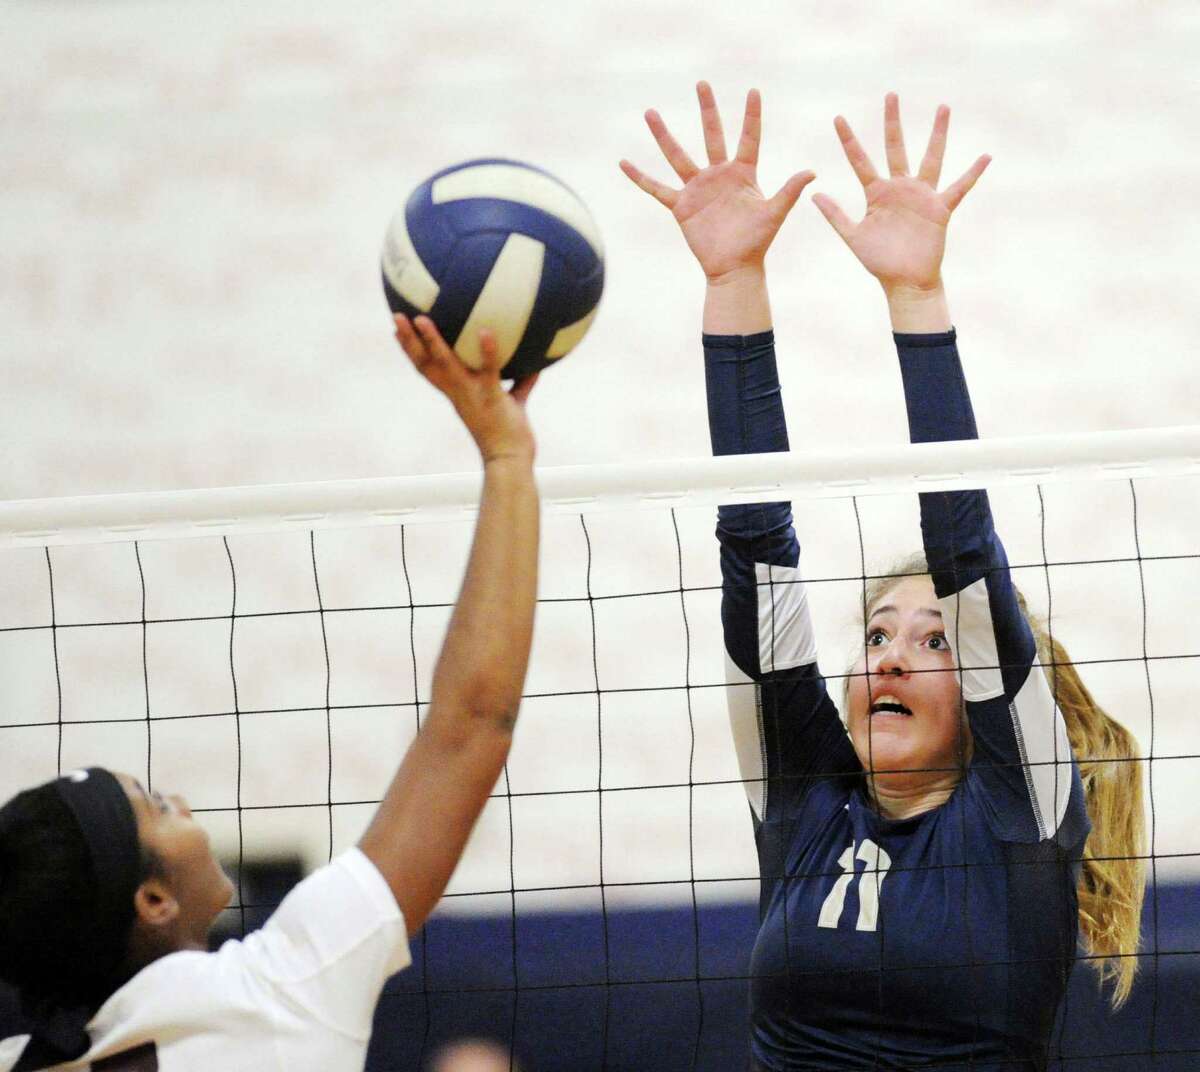 St. Luke's Caitlyn Hughes, left, attempts to get a shot past King's Ava Robinowitz (11) during the NEPSAC girls volleyball semifinal match between King School and St. Luke's School at King in Stamford, Conn., Friday, Nov. 18, 2016. King advanced with a 3-0 win over St. Luke's.